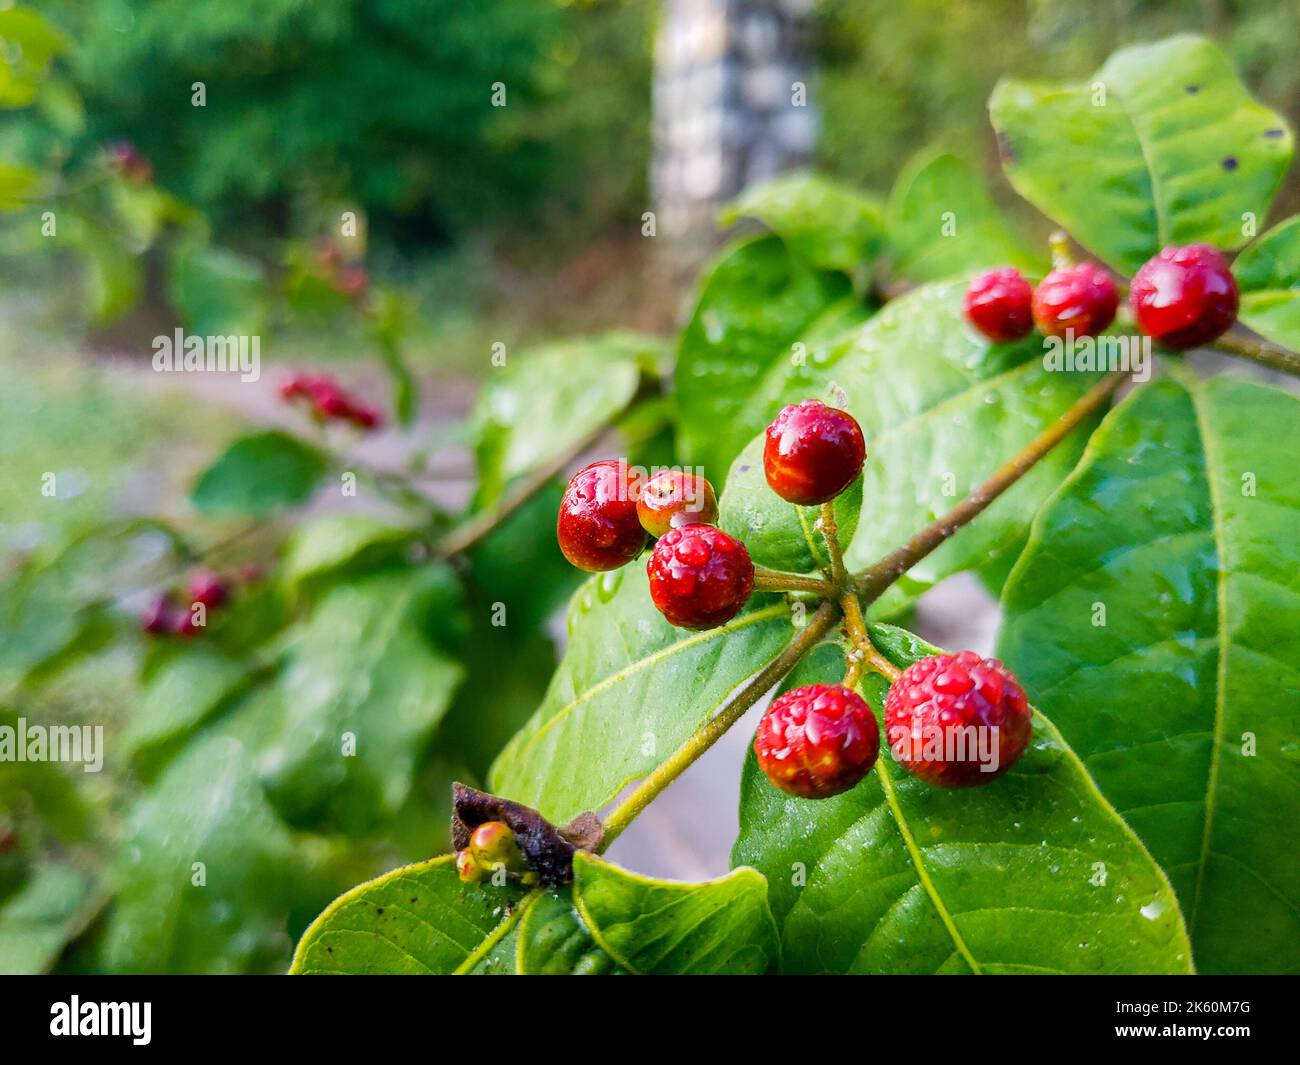 Fruits and leaves of Rauvolfia tetraphylla, commonly known as the be still tree or devil-pepper. Uttarakhand India. Stock Photo